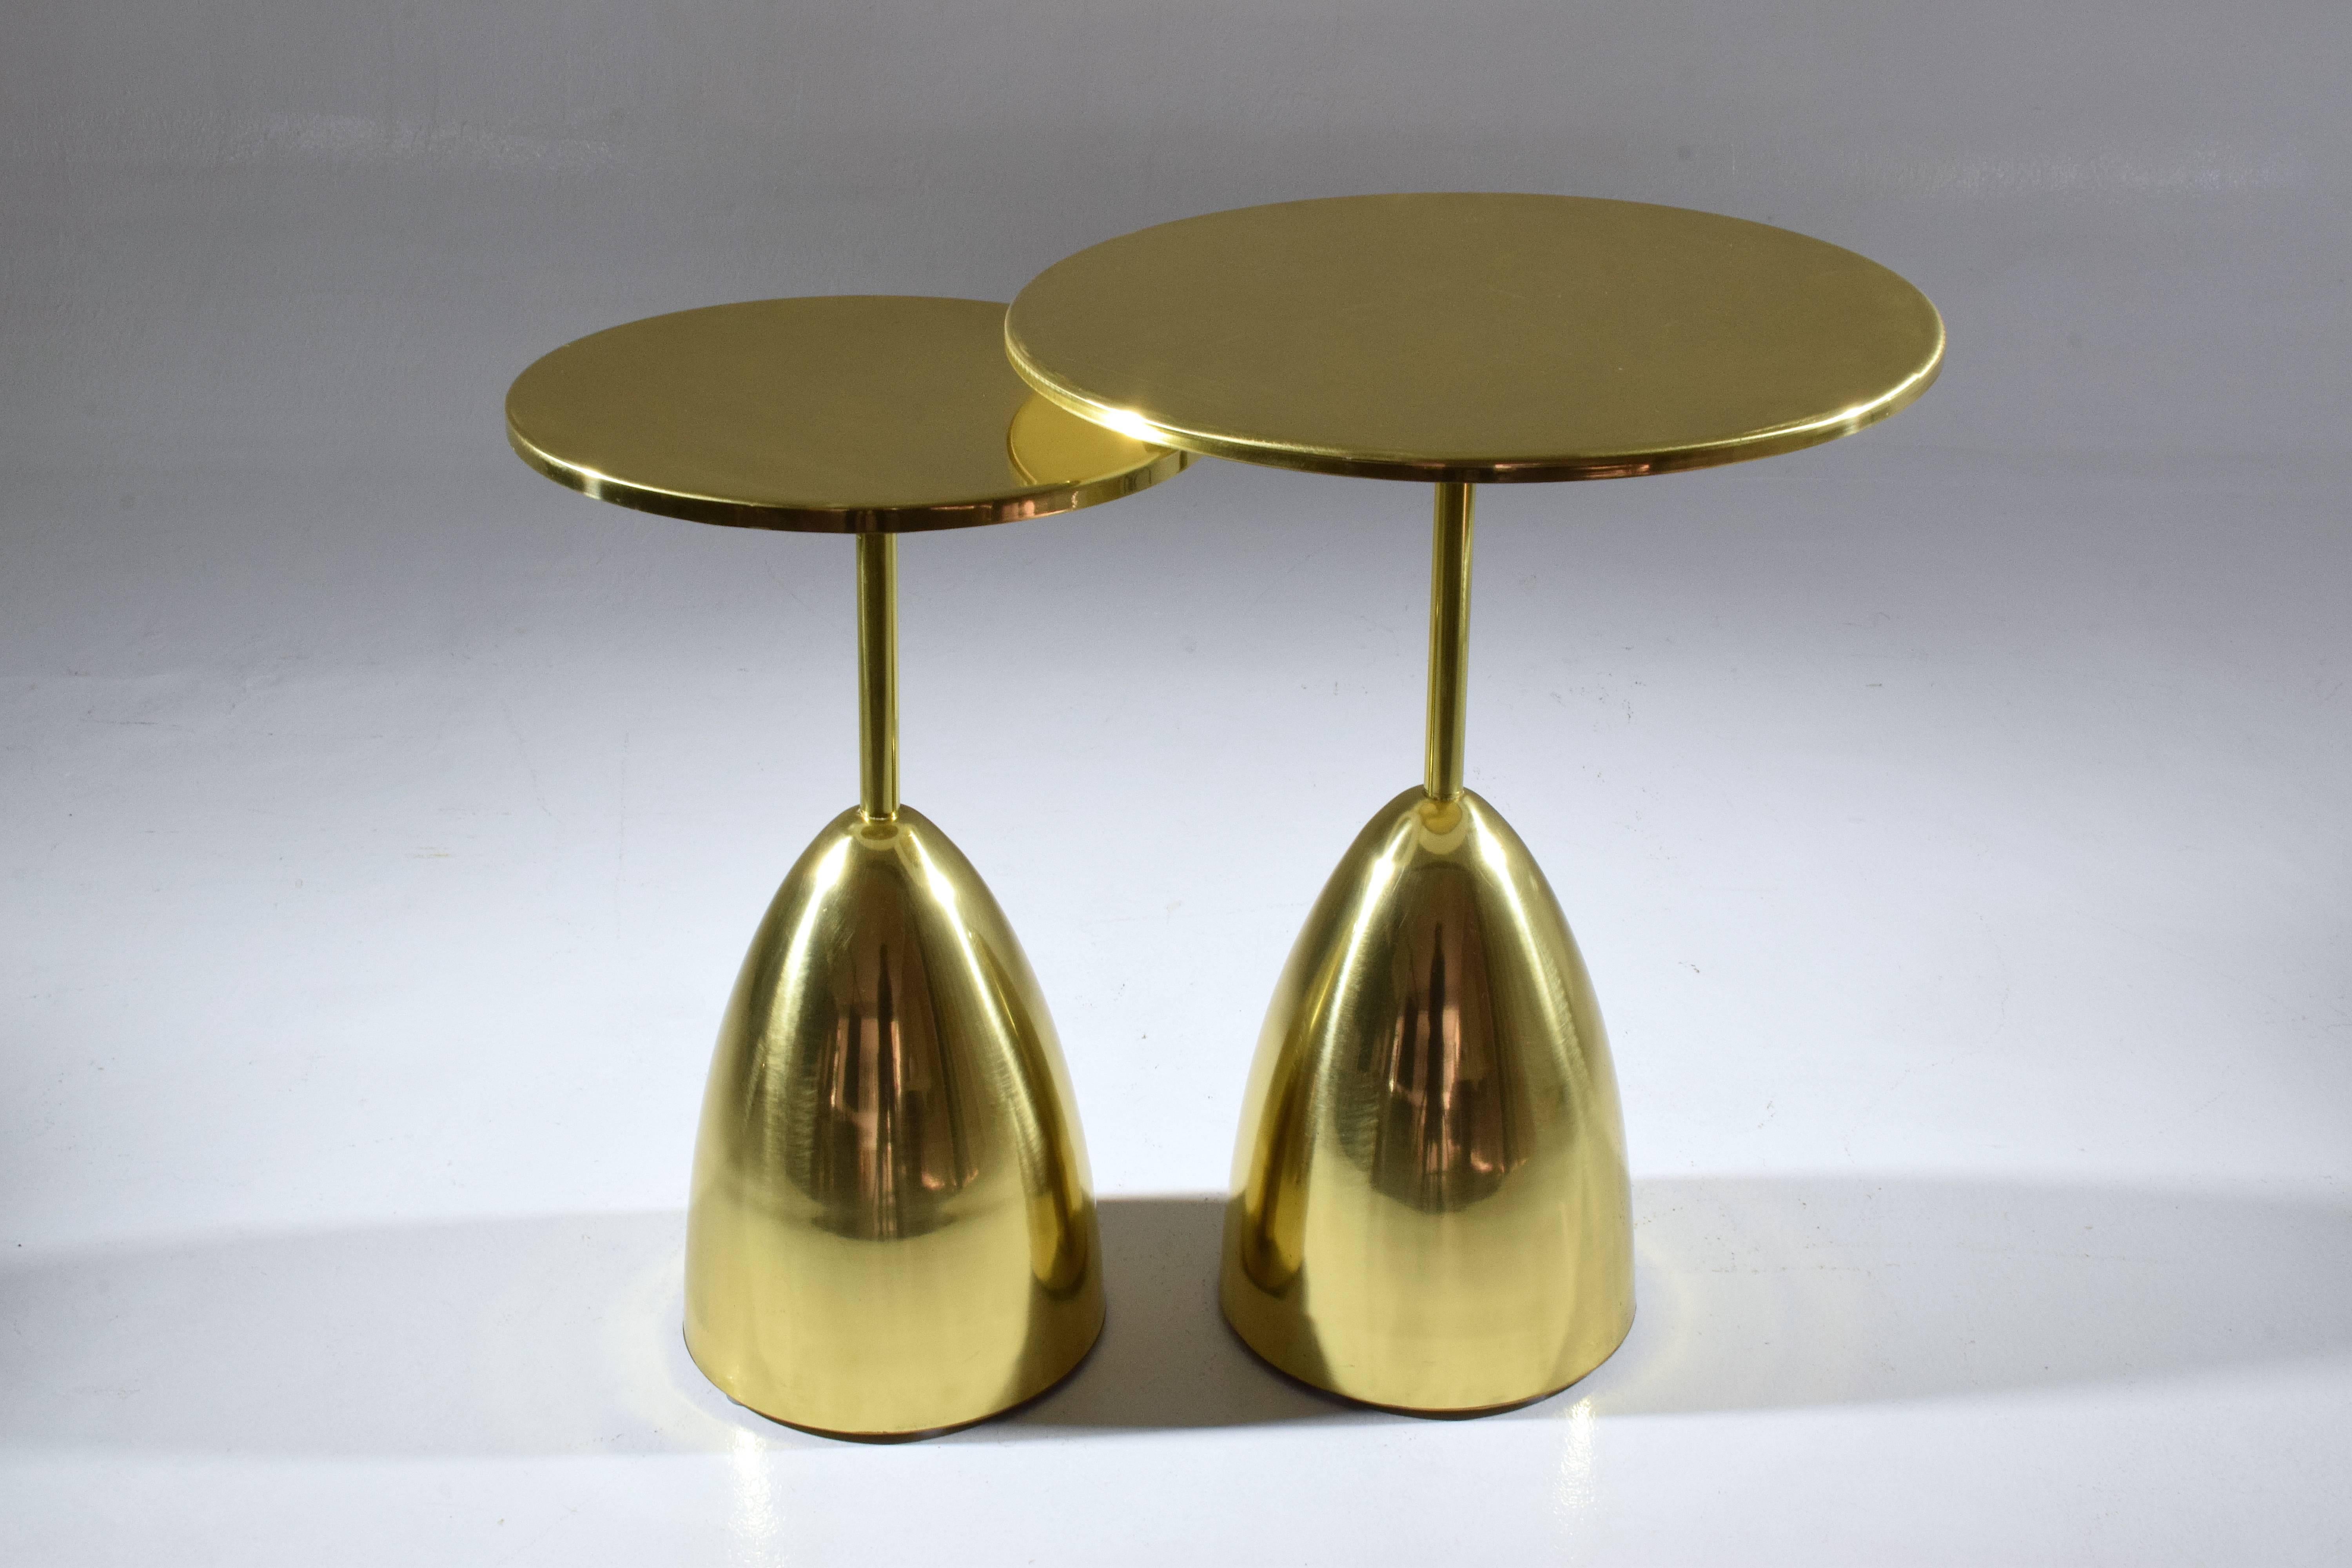 Stone-B Contemporary Handcrafted Brass Side Table, Flow Collection 2